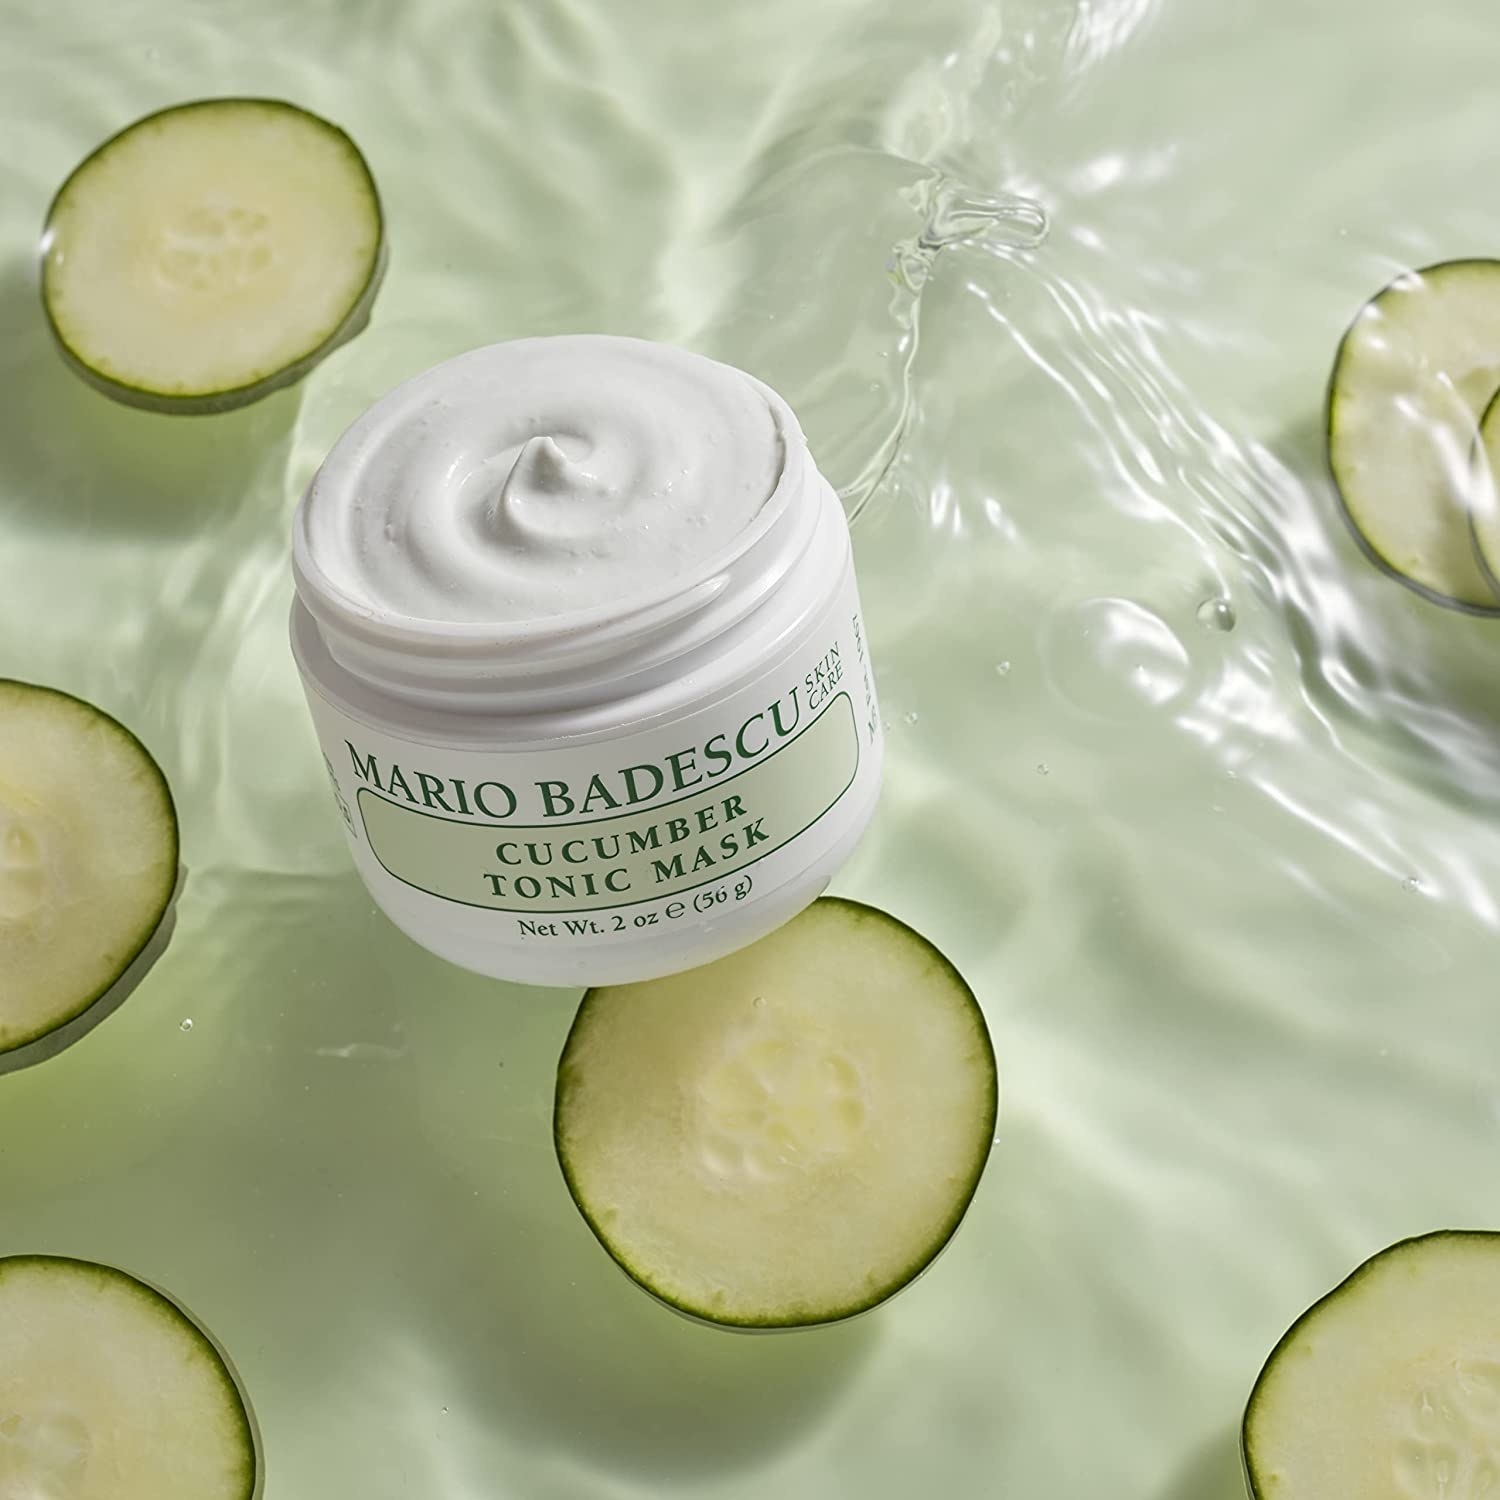 A jar of the cucumber mask against a backdrop of water and cucumber slices